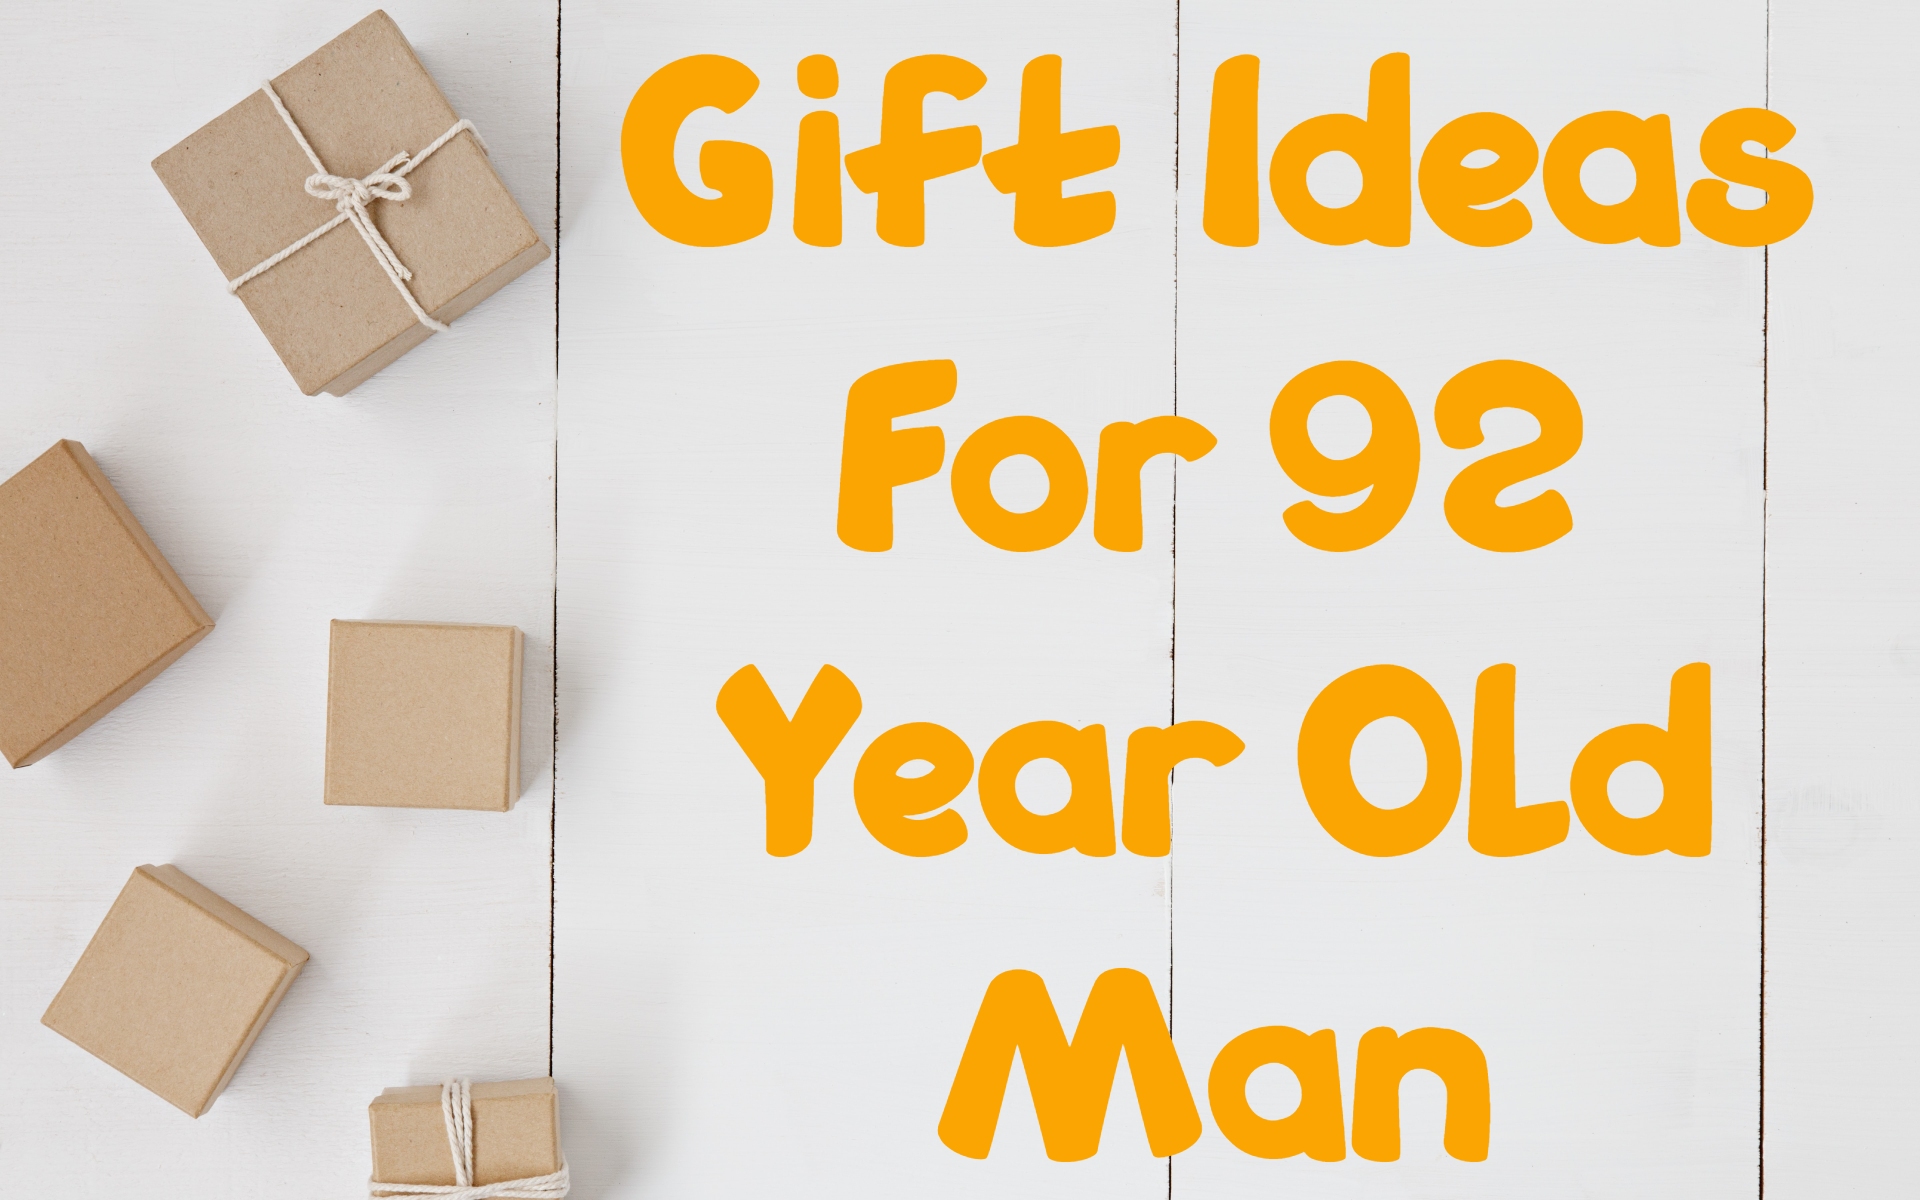 Cover image of gift ideas for 92-year-old man by Giftsedge